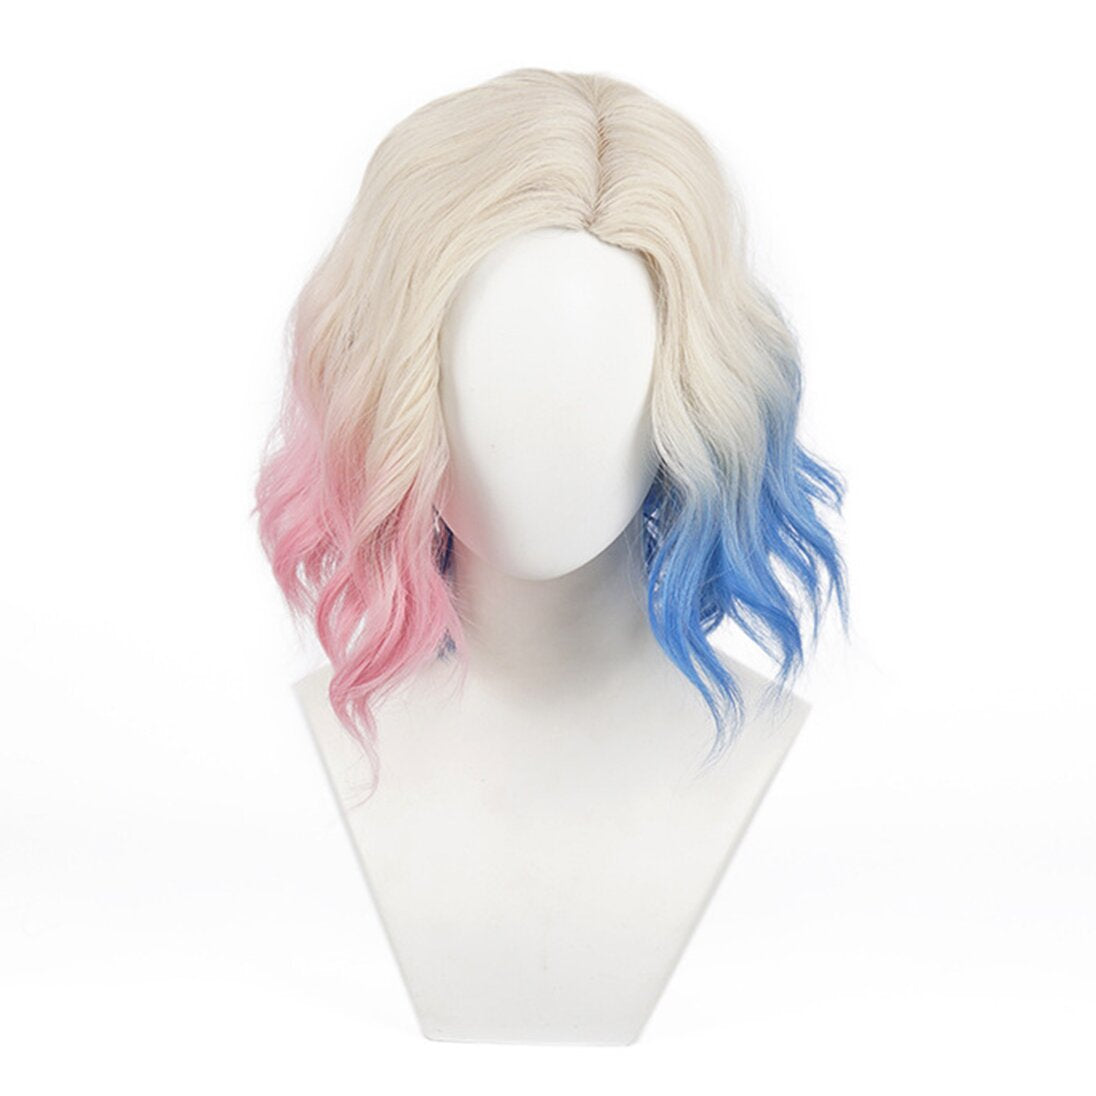 35cm Synthetic Short Blonde Wig Cosplay Costume Game OW Overwatch